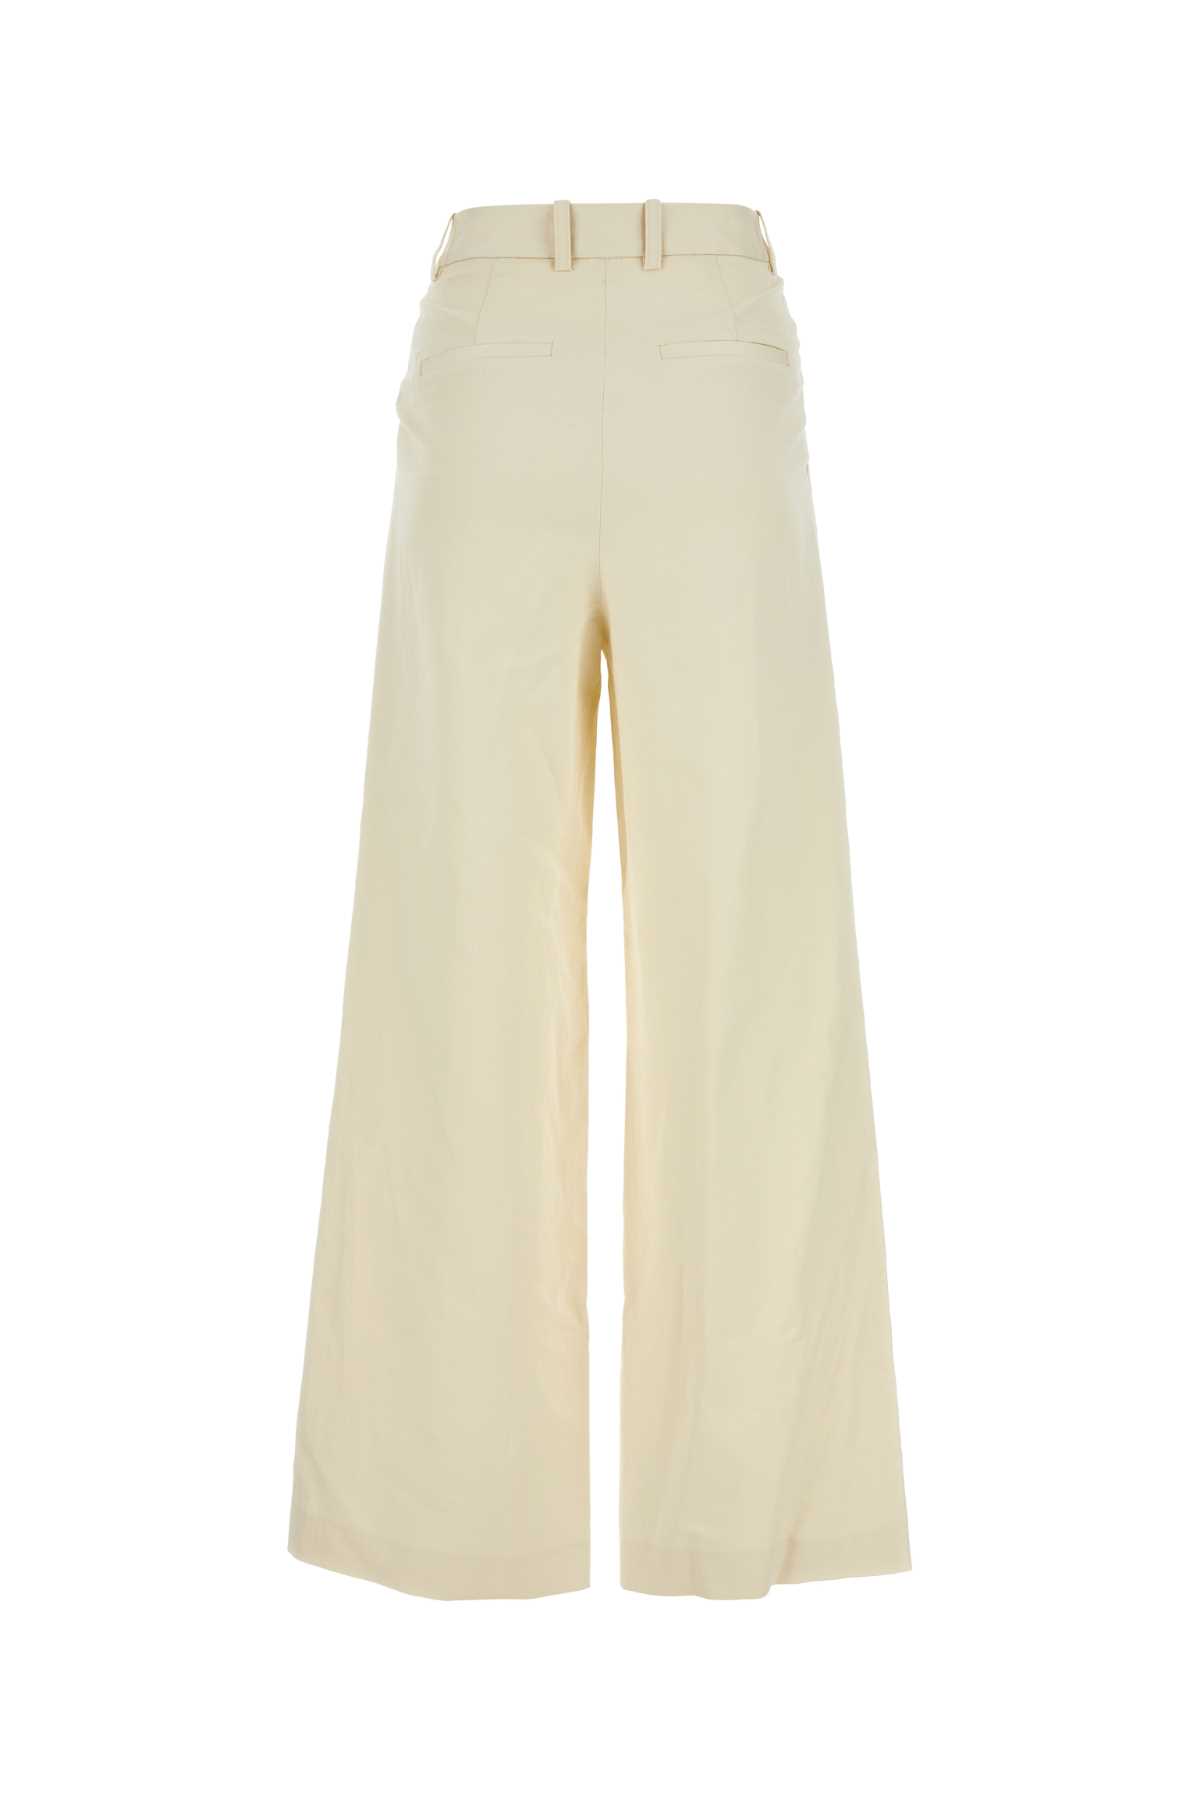 Loulou Studio Ivory Cotton Blend Idai Palazzo Pant In Frostivory